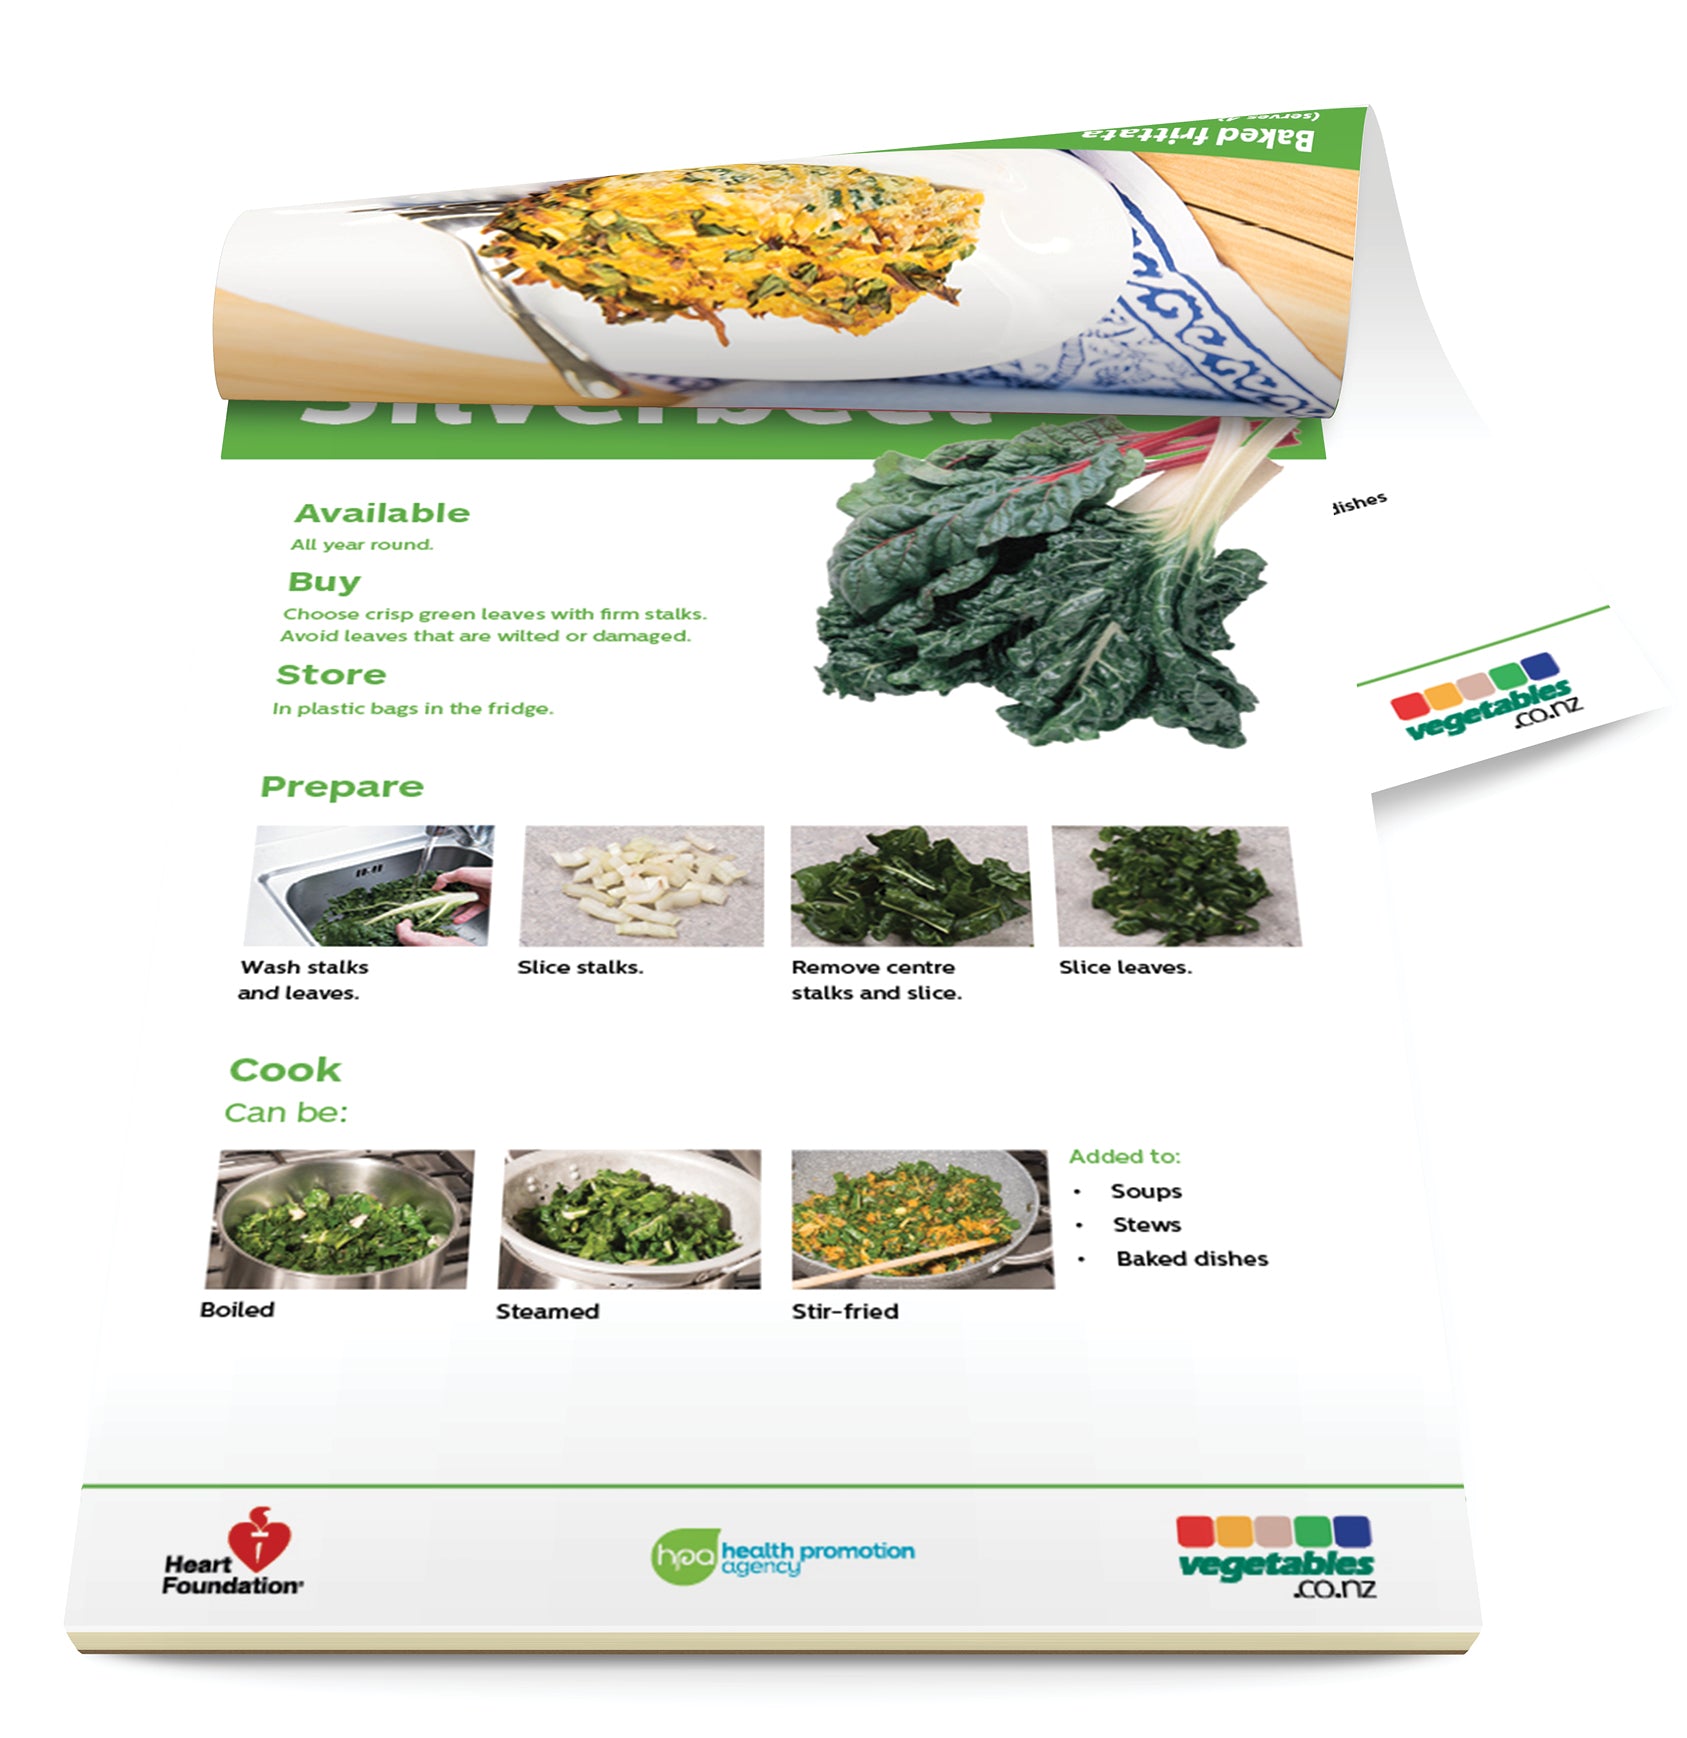 Easy meals with vegetables: Silverbeet - Digital only